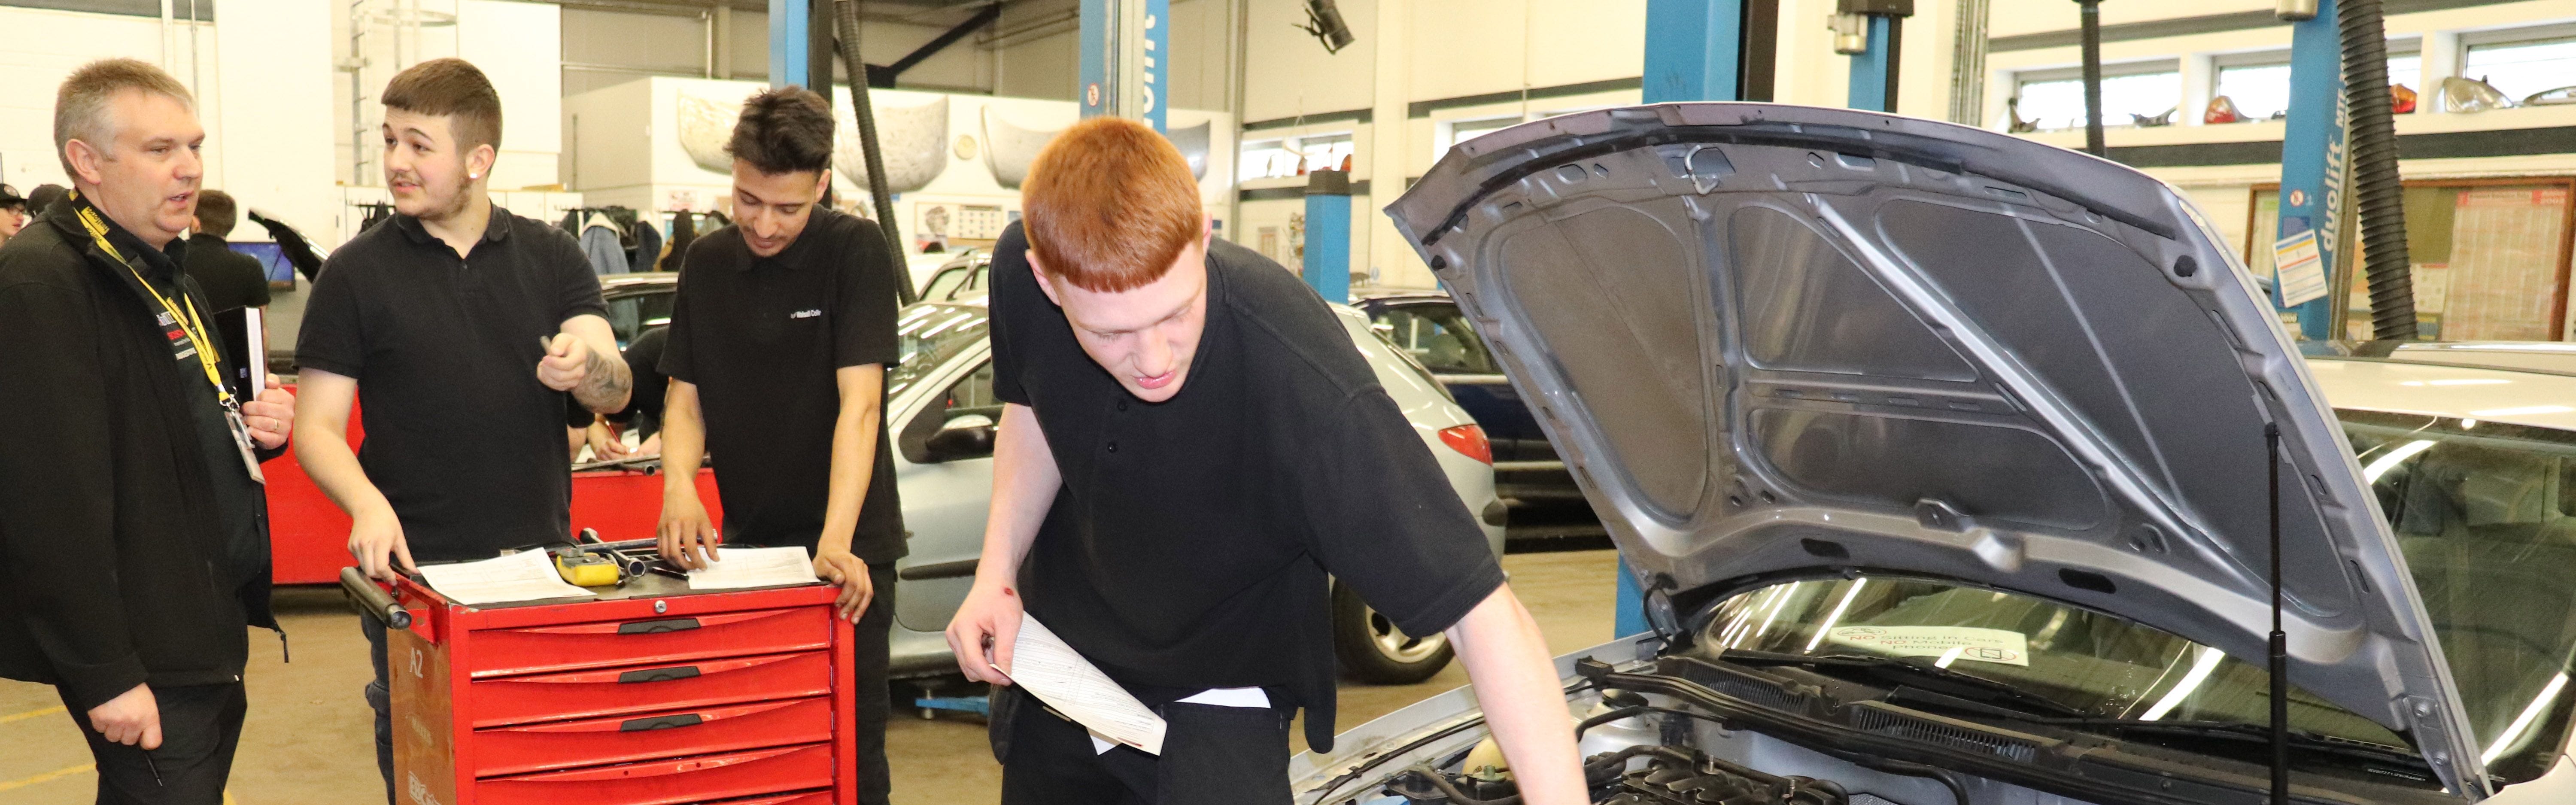 male automotive students speaking with Halfords representative